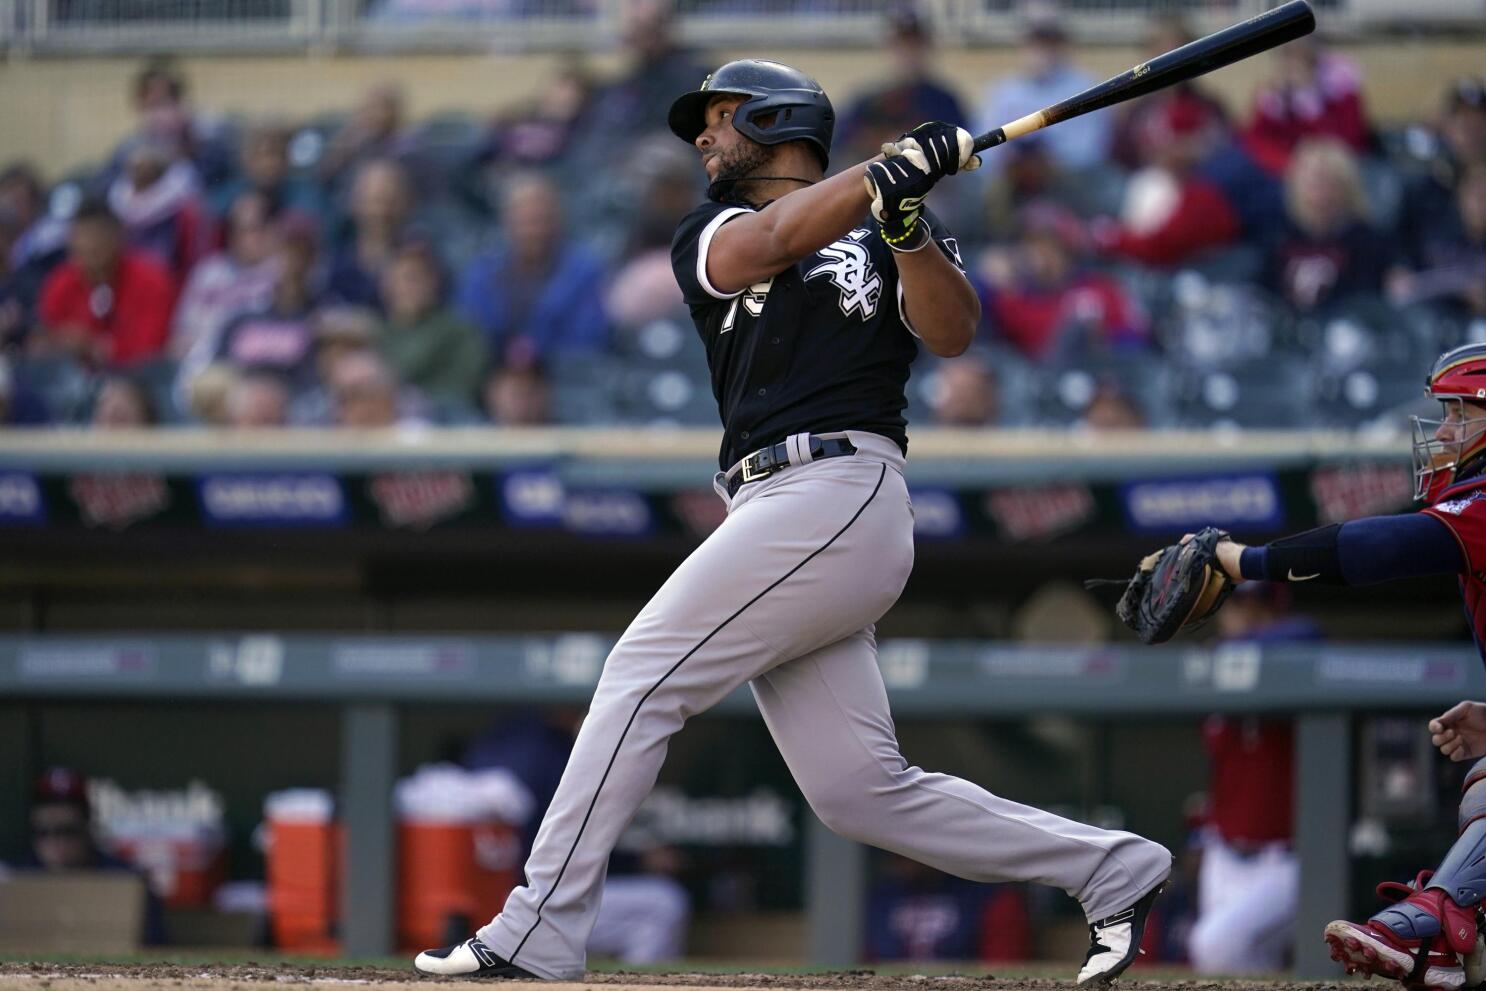 It took a while, but the Astros signing Jose Abreu finally paid off